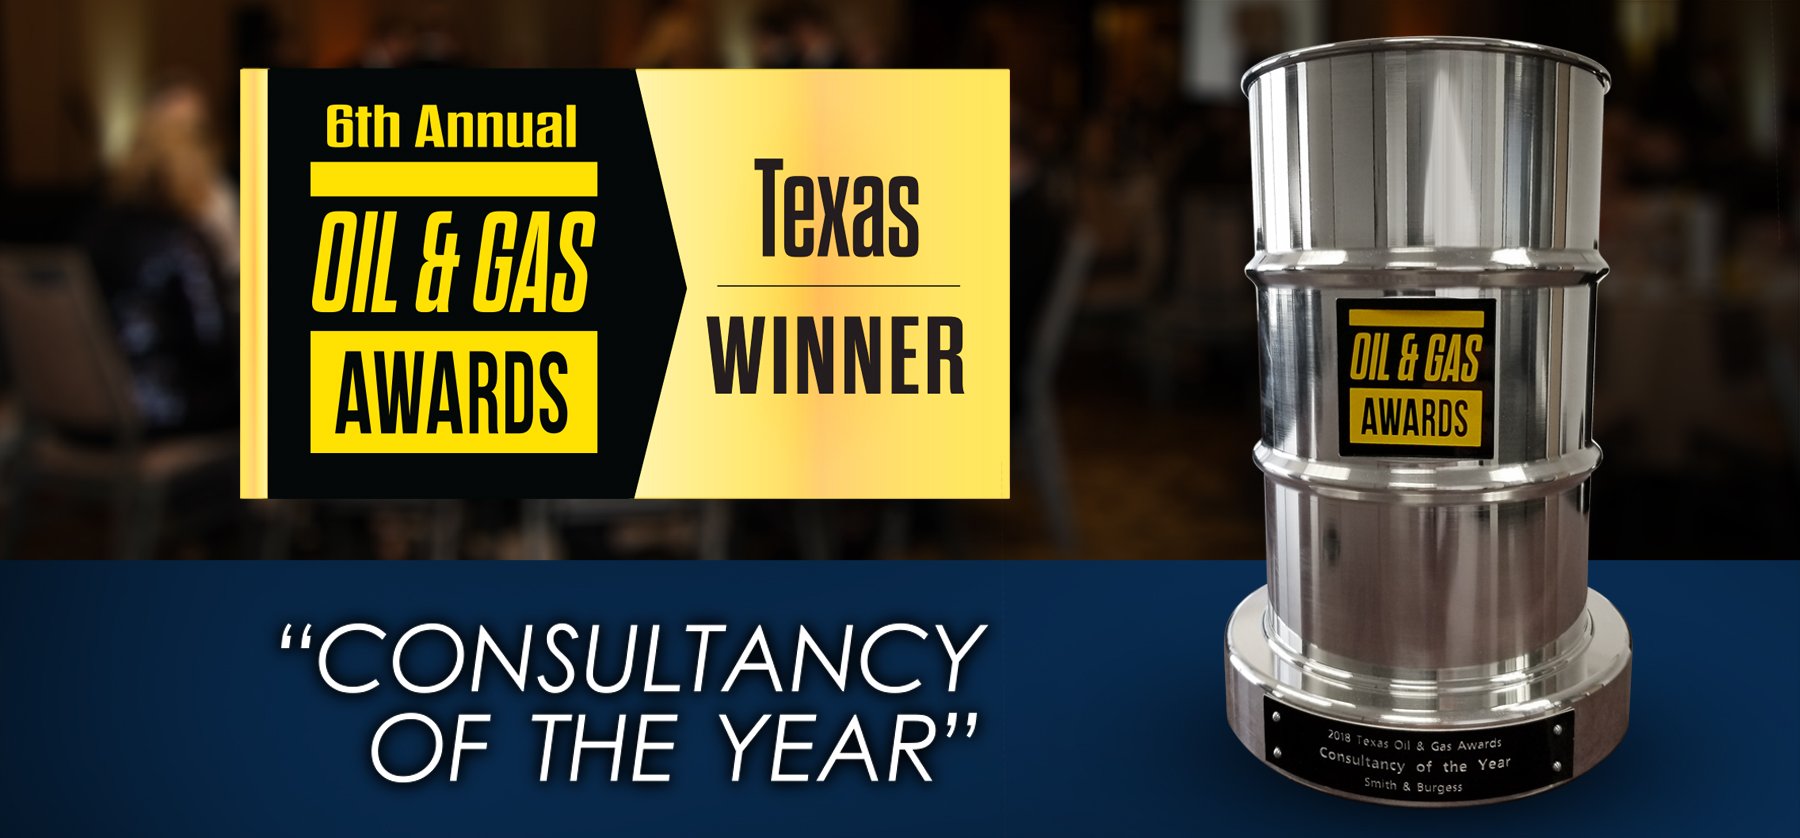 2018 Oil and Gas Award's "Consultancy of the Year" Texas Region